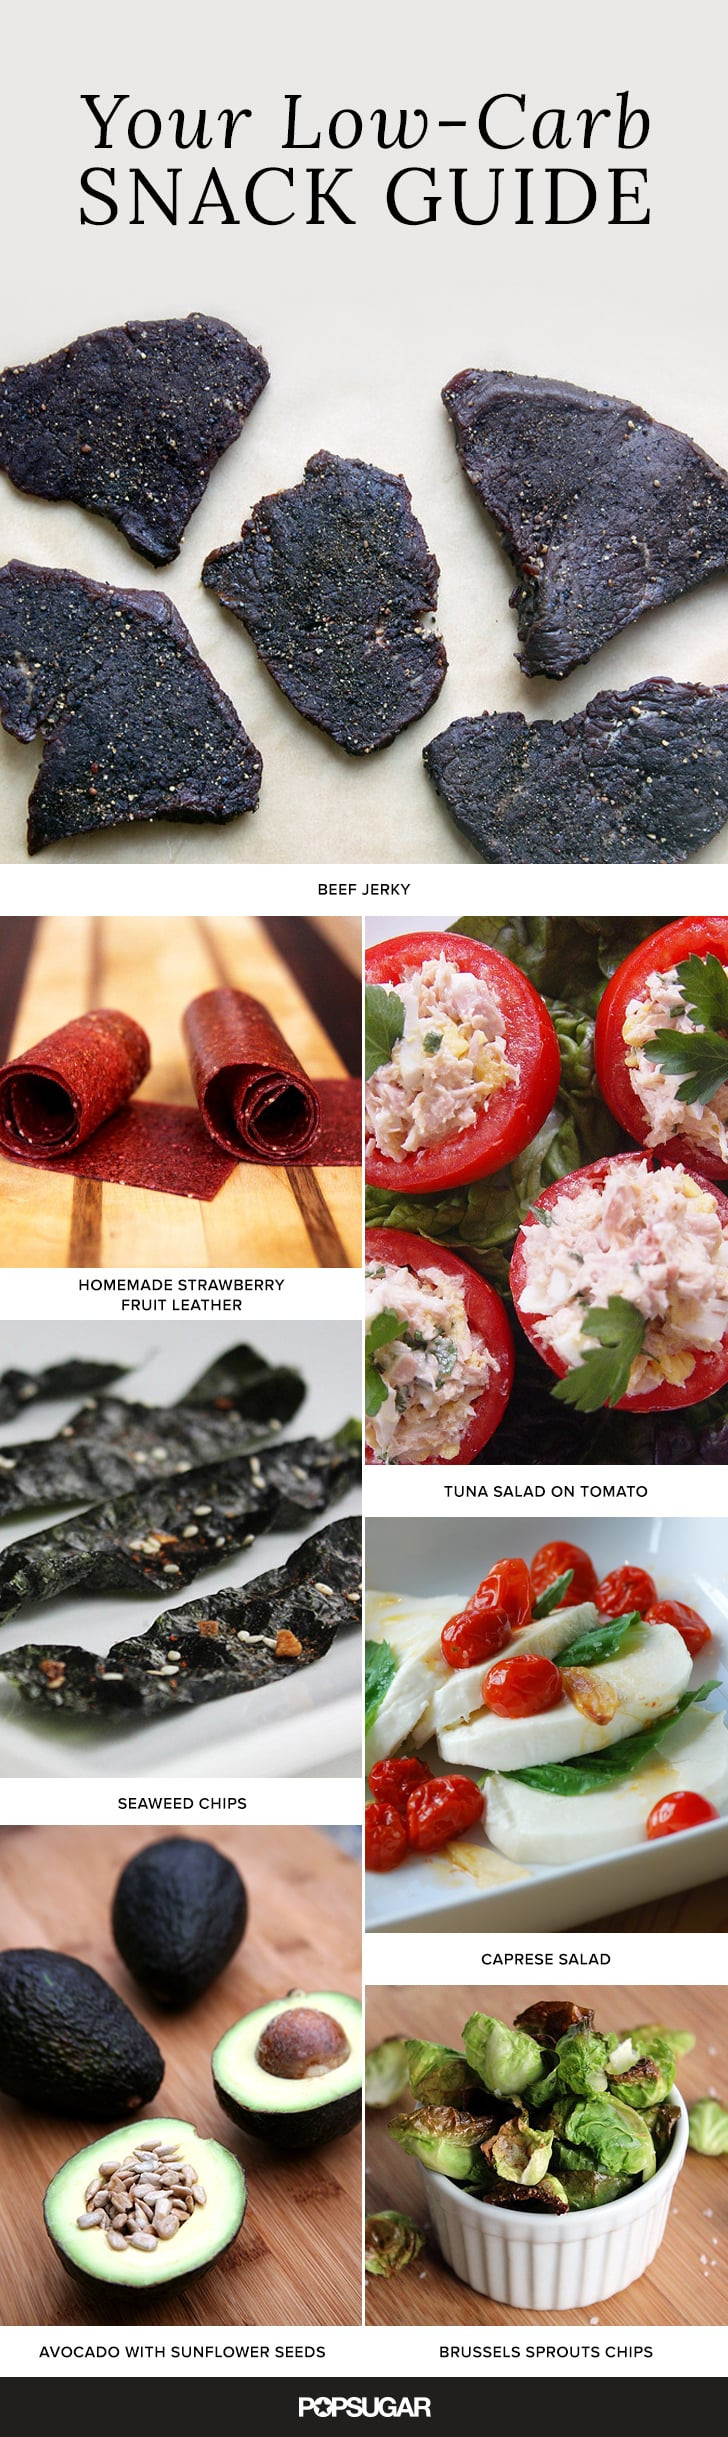 Low Carb Healthy Snacks
 Healthy Low Carb Snack Ideas